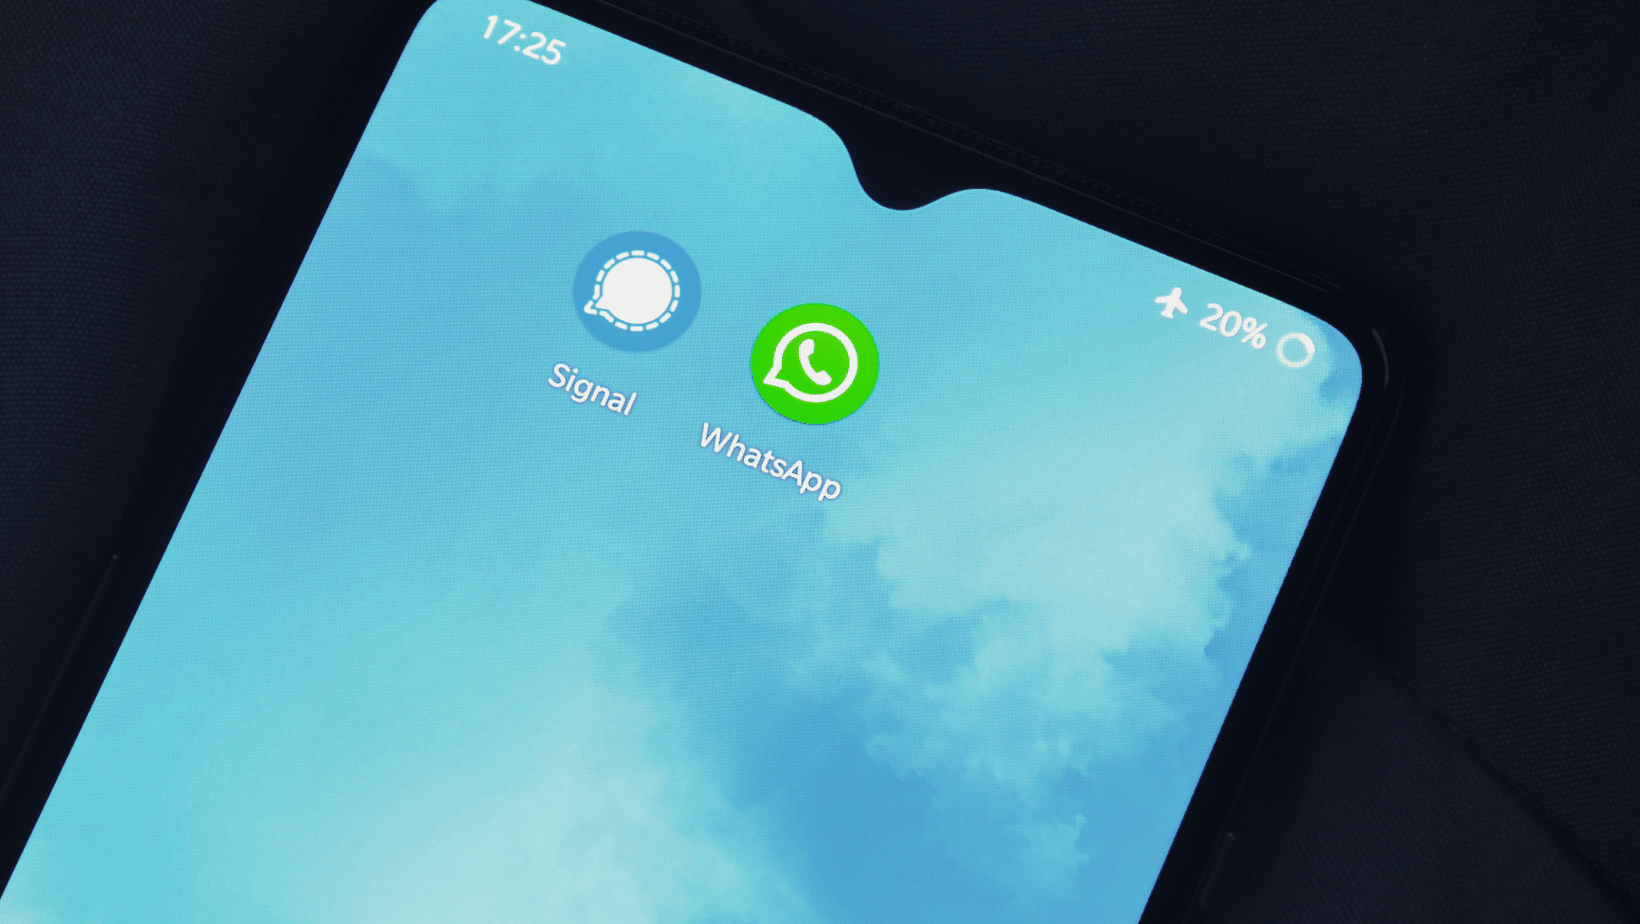 How to Add Stickers to WhatsApp